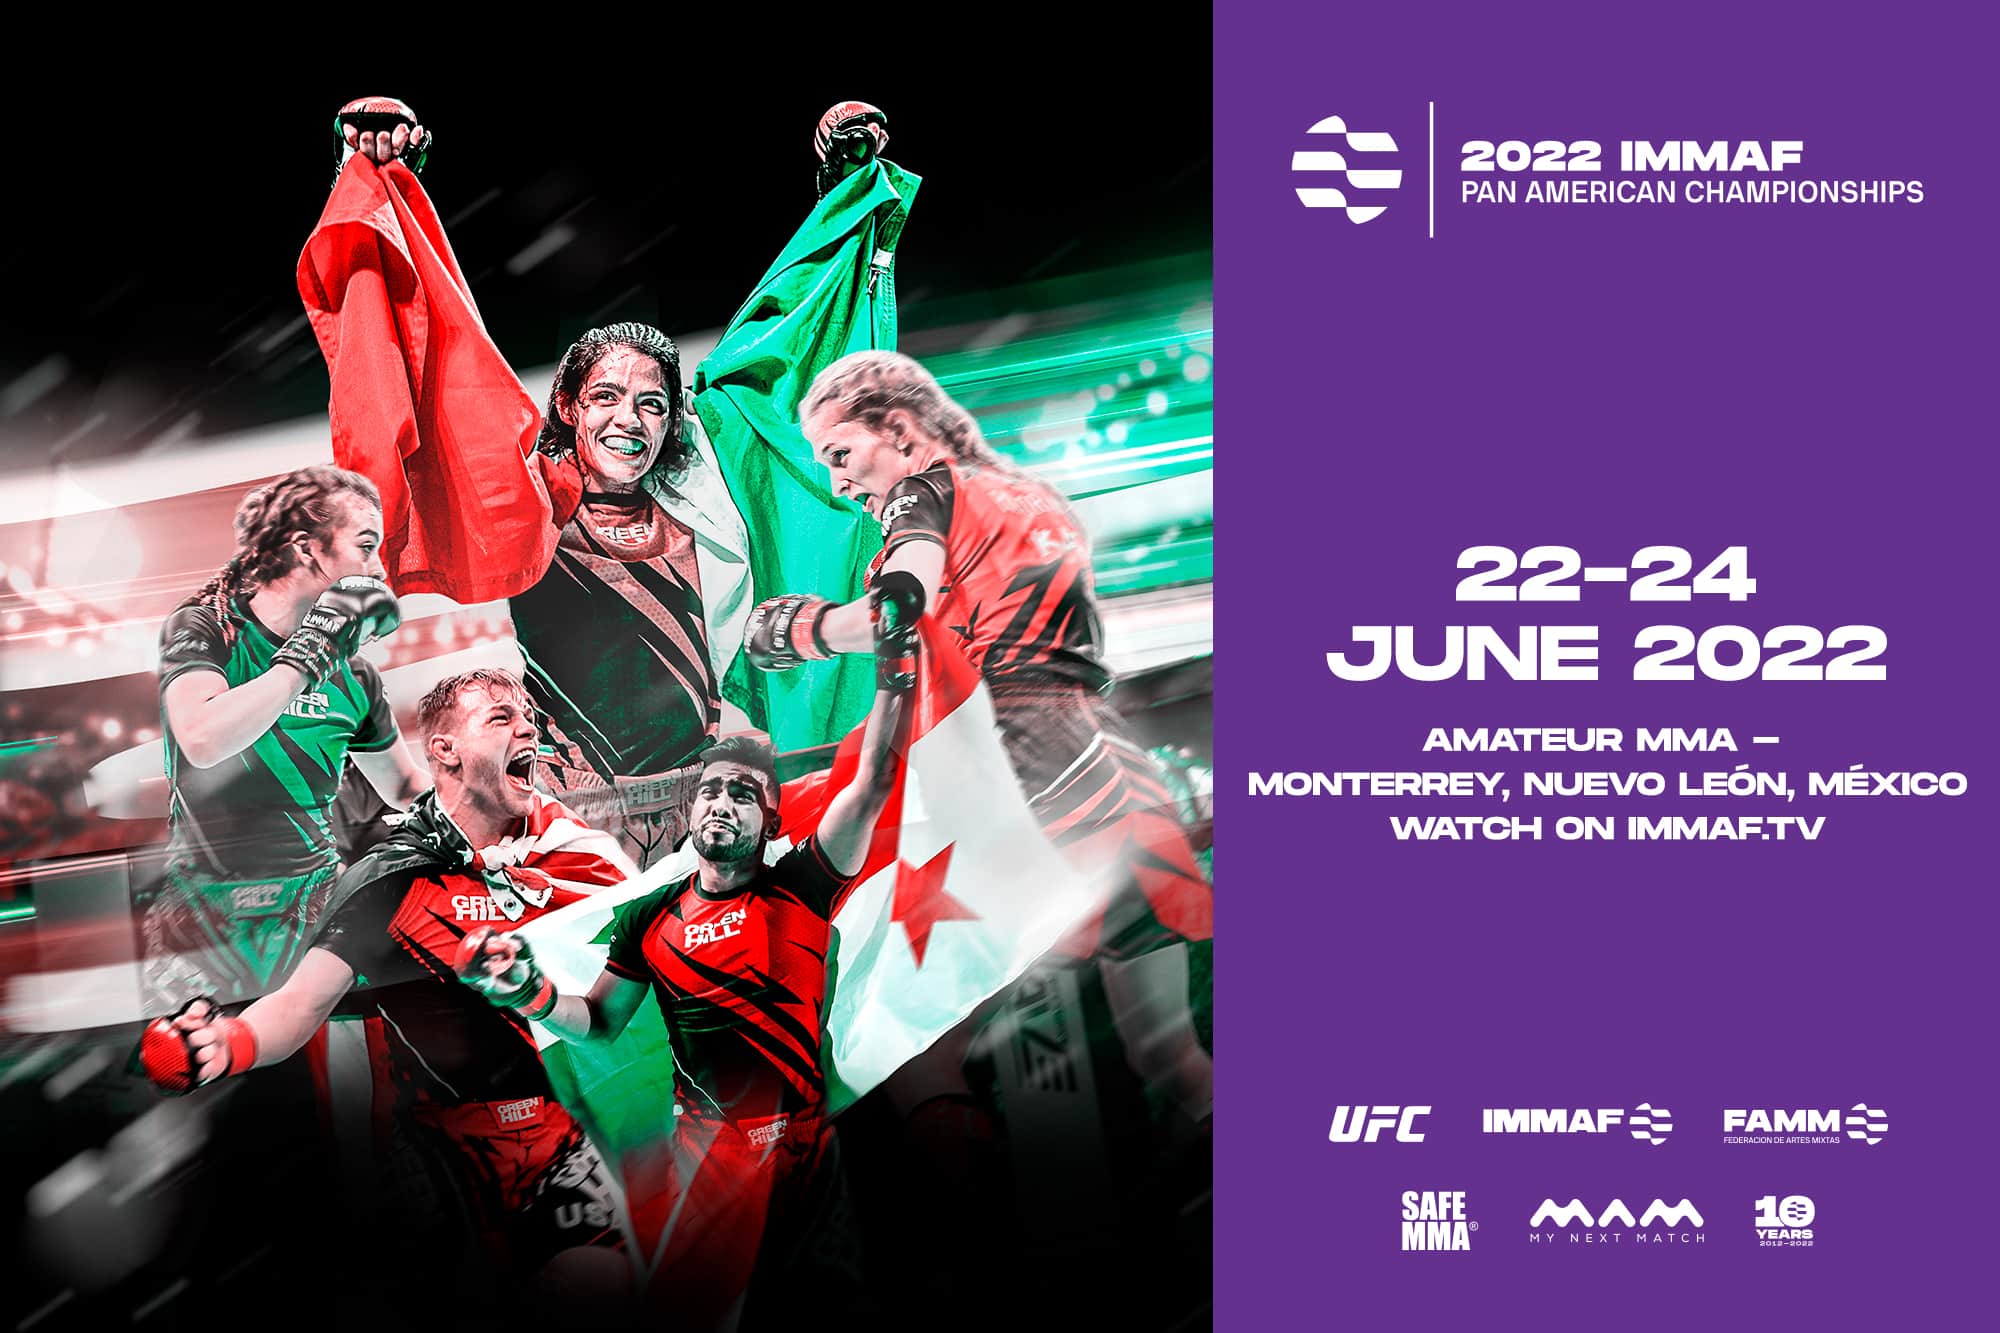 Registration opens for 2022 IMMAF Pan American Championships